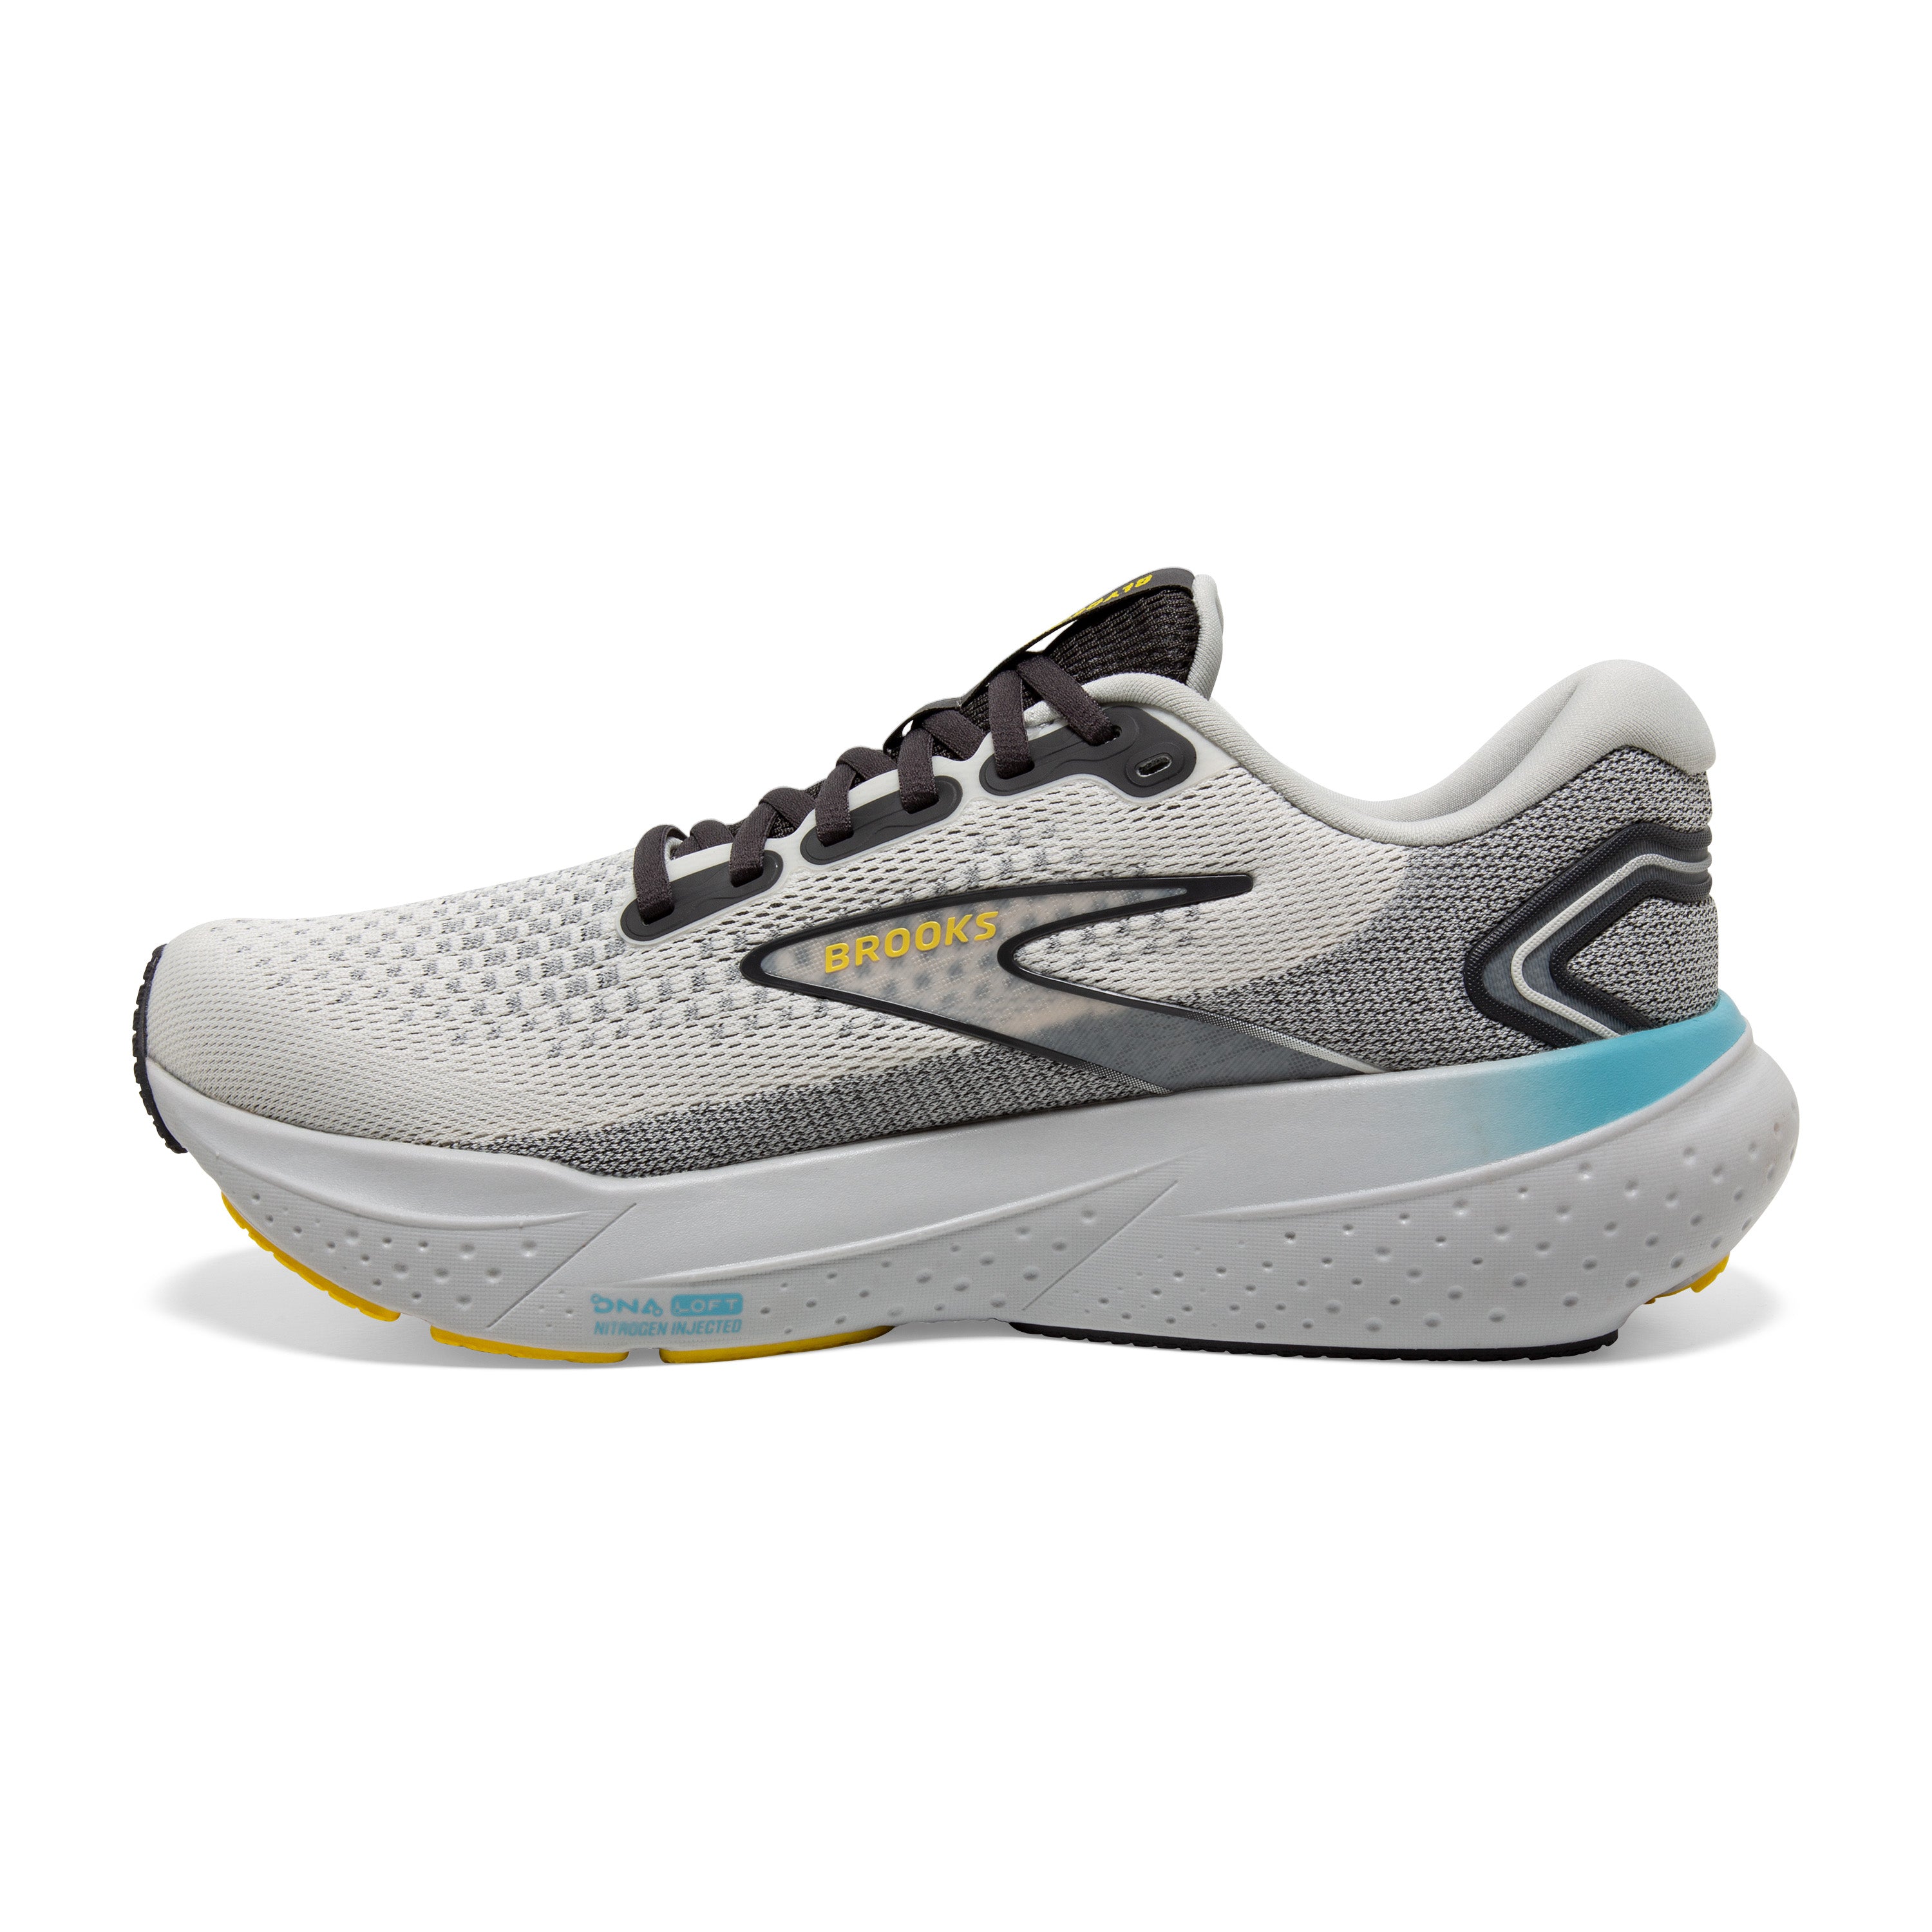 BROOKS MEN'S GLYCERIN 21 - D - 184 COCONUT/FORGED IRON/YELLOW 